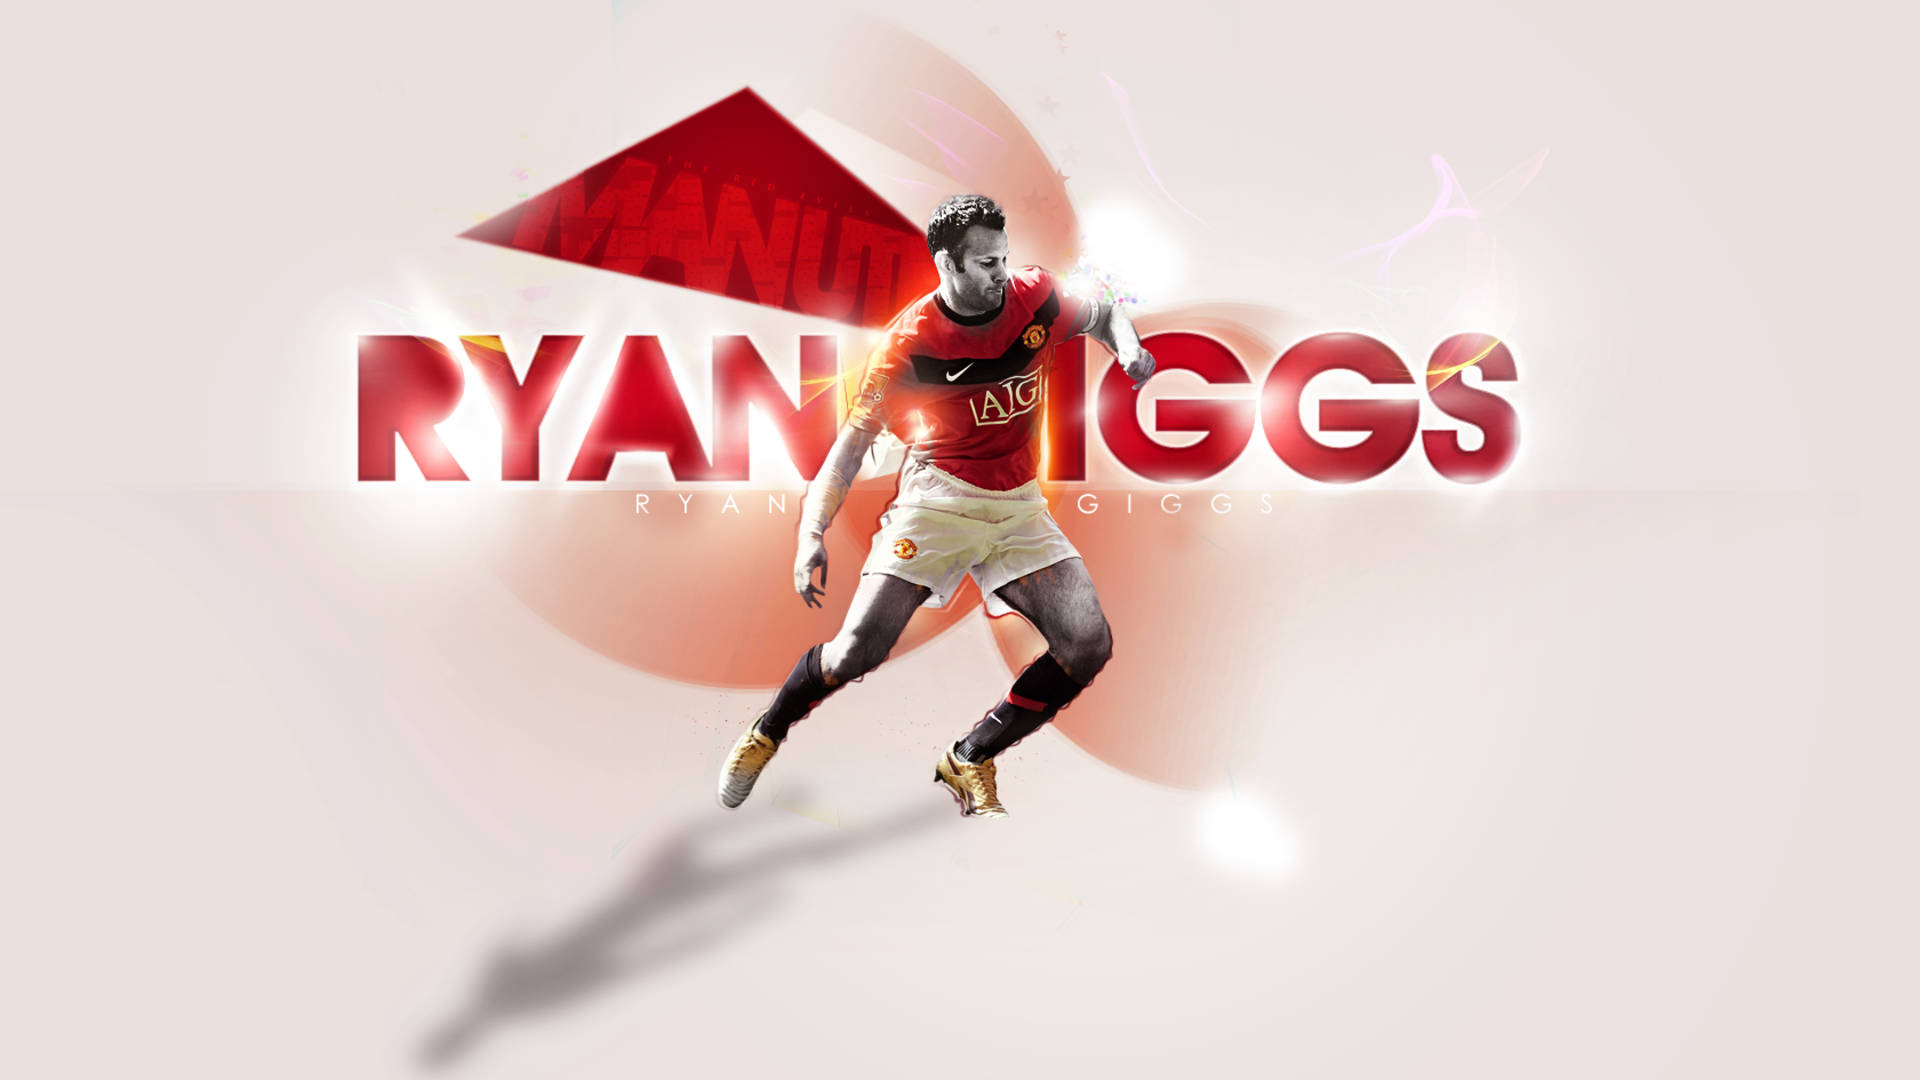 Cool Ryan Giggs Football Background